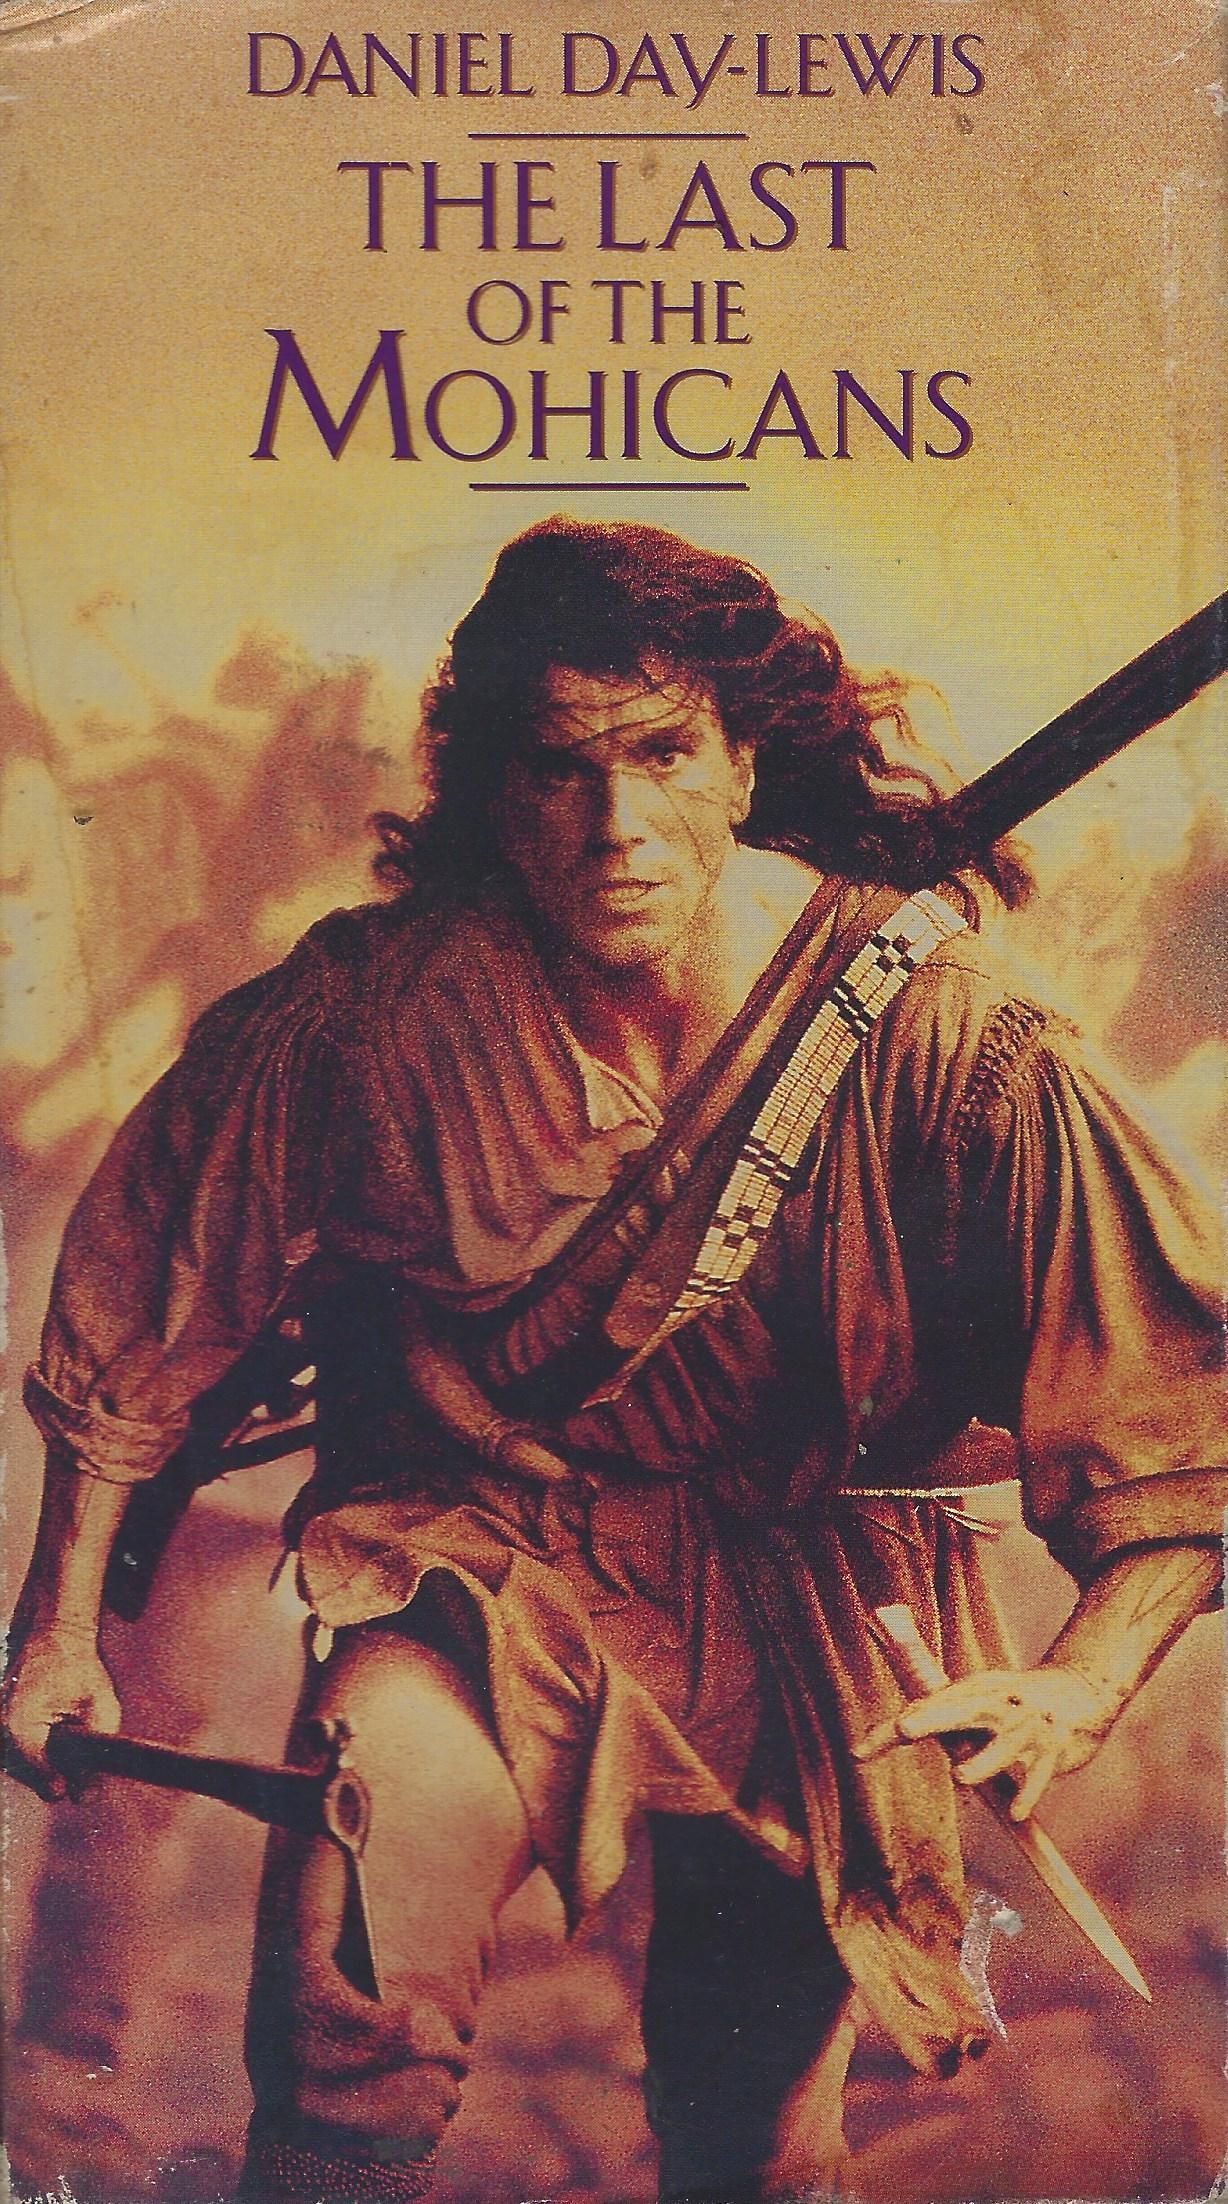 Daniel Day-Lewis in The Last of the Mohicans Film Poster